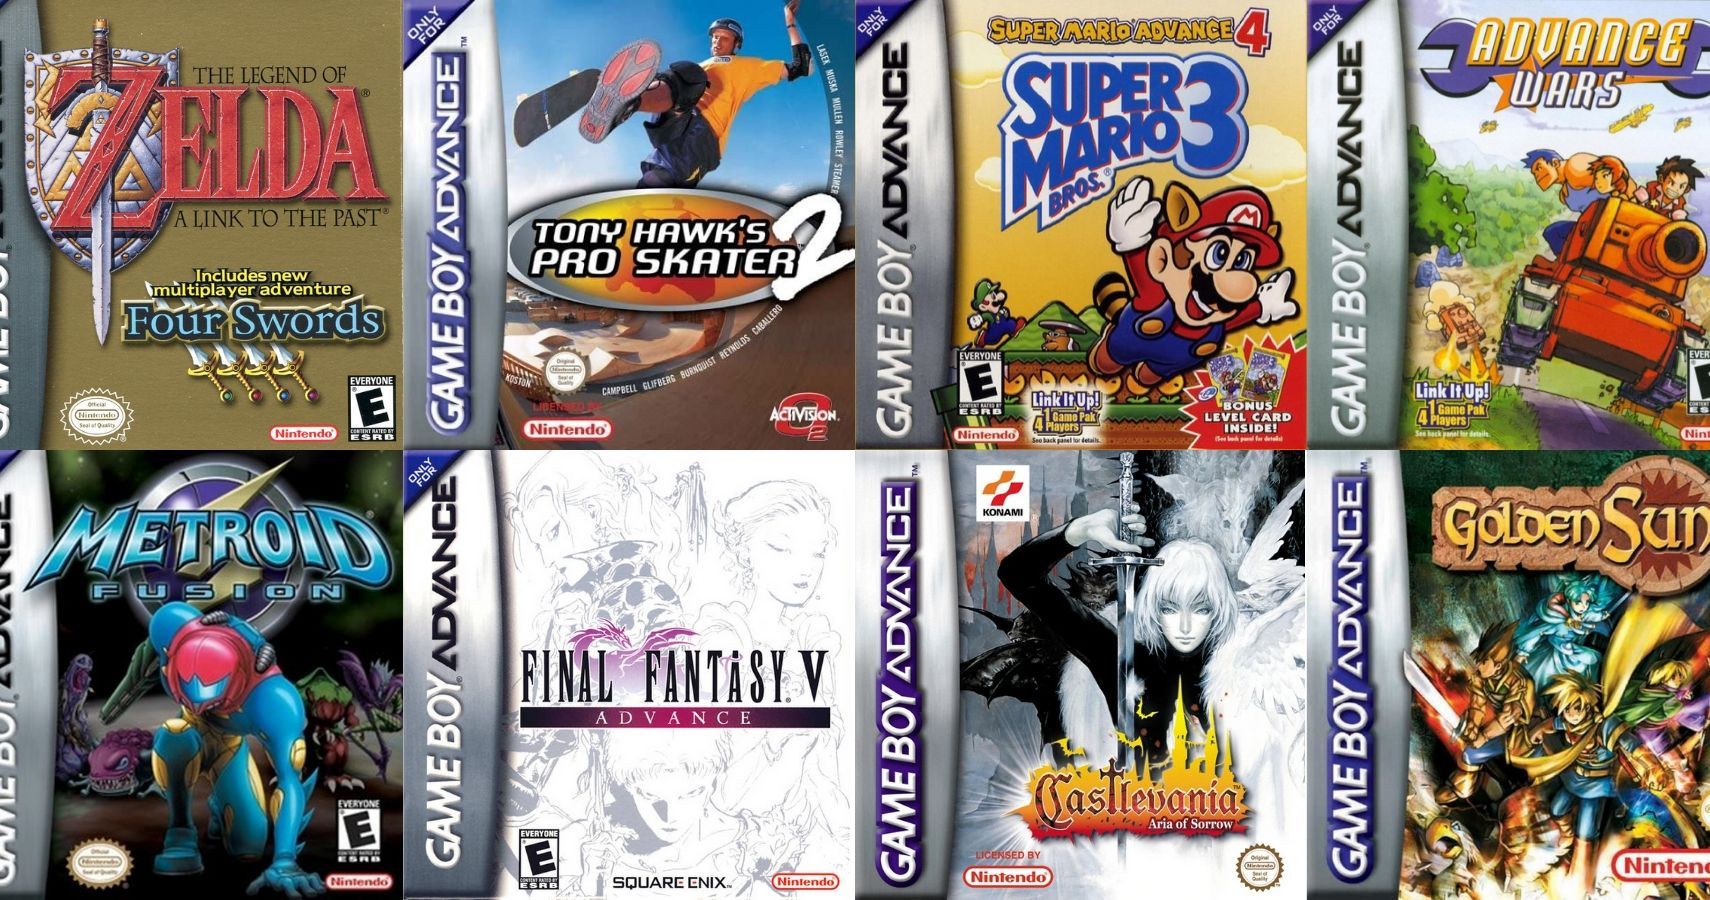 Skifte tøj 鍔 børste 10 of the Best Games for the Game Boy Advance Based on Metacritic Scores